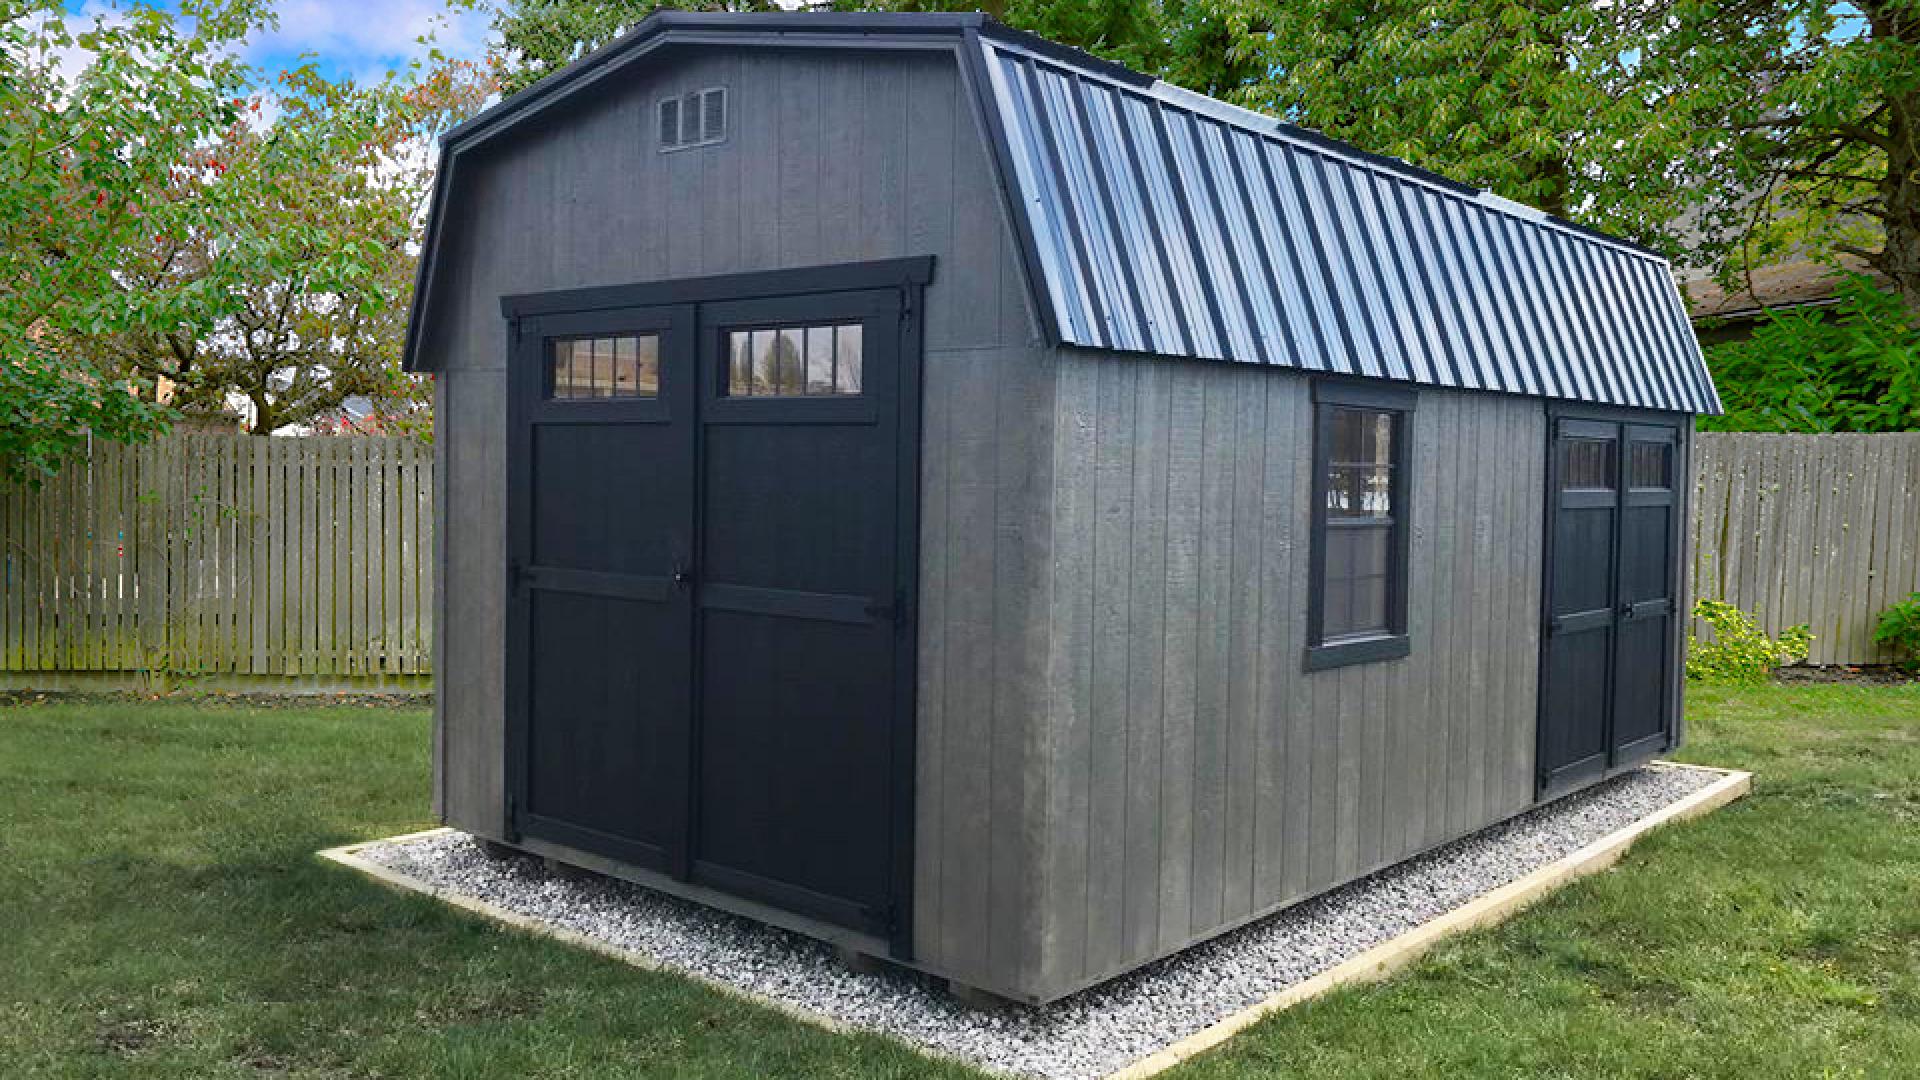 Signature high barn with grey wood siding, two sets of black double doors, black trim windows, and a black metal roof.